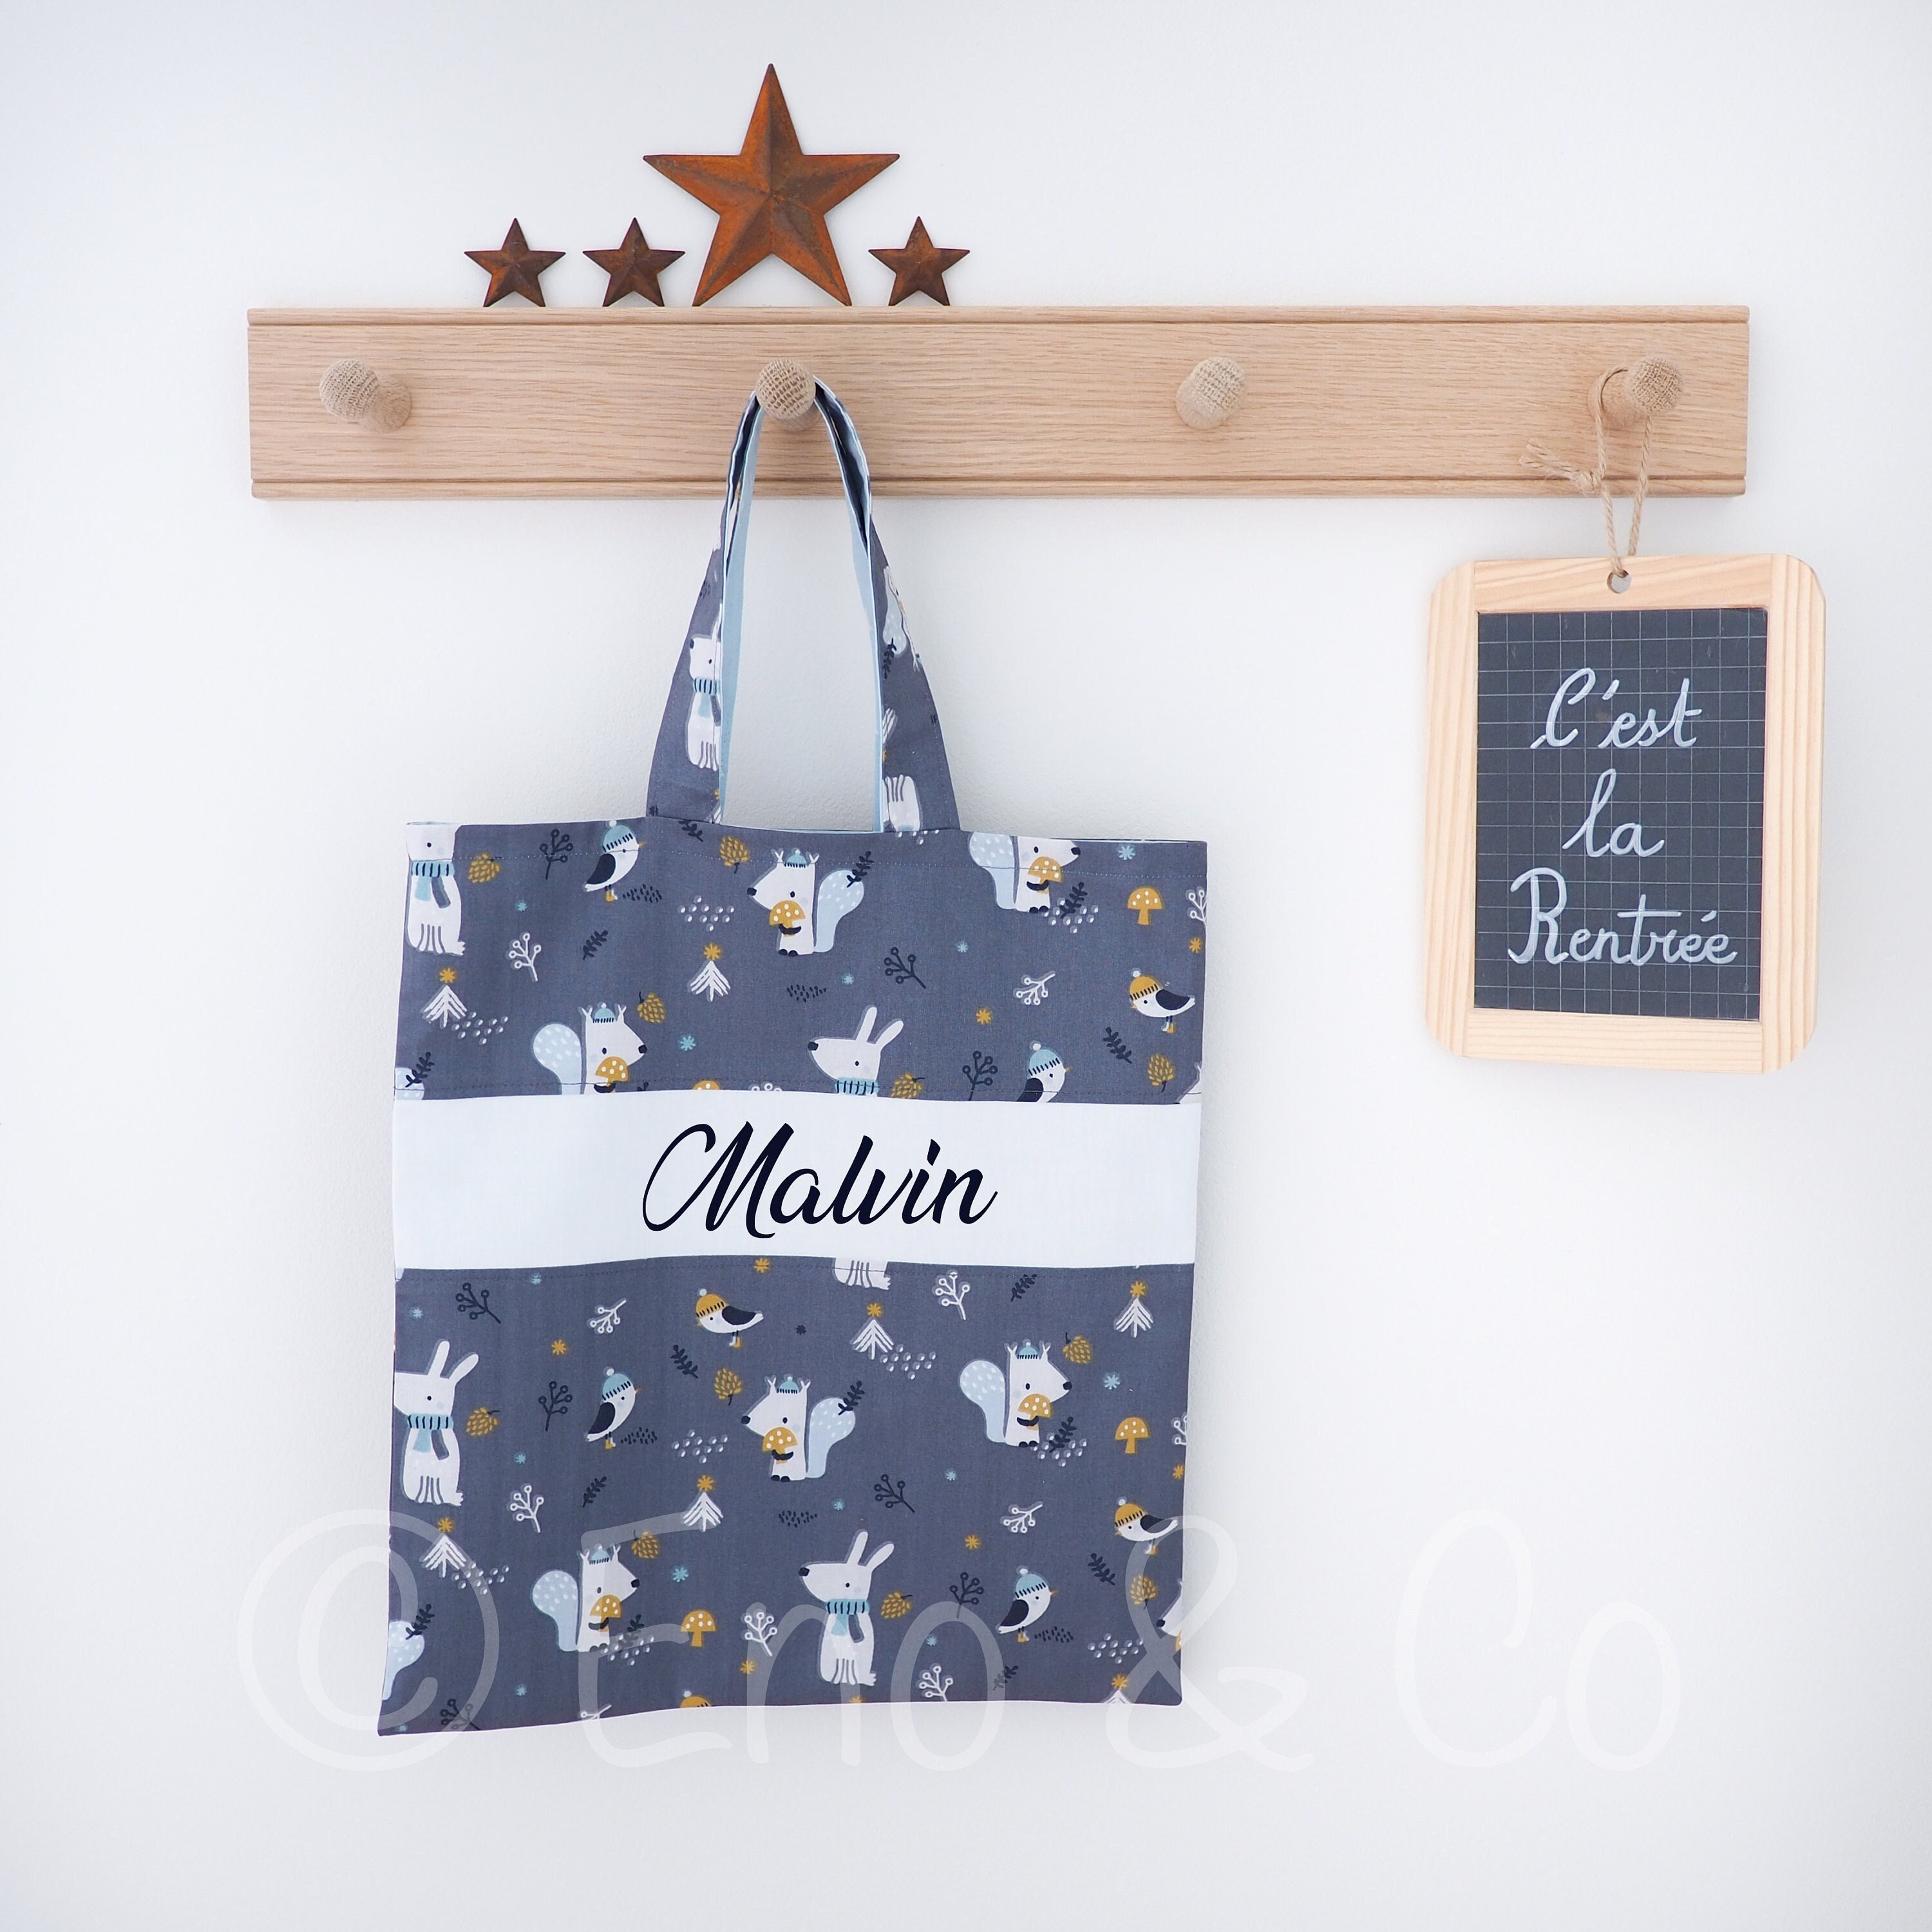 Sacoche - Premium 15,6 pouces - Cultura - Tote bag - Supports Customisation  - Customisation